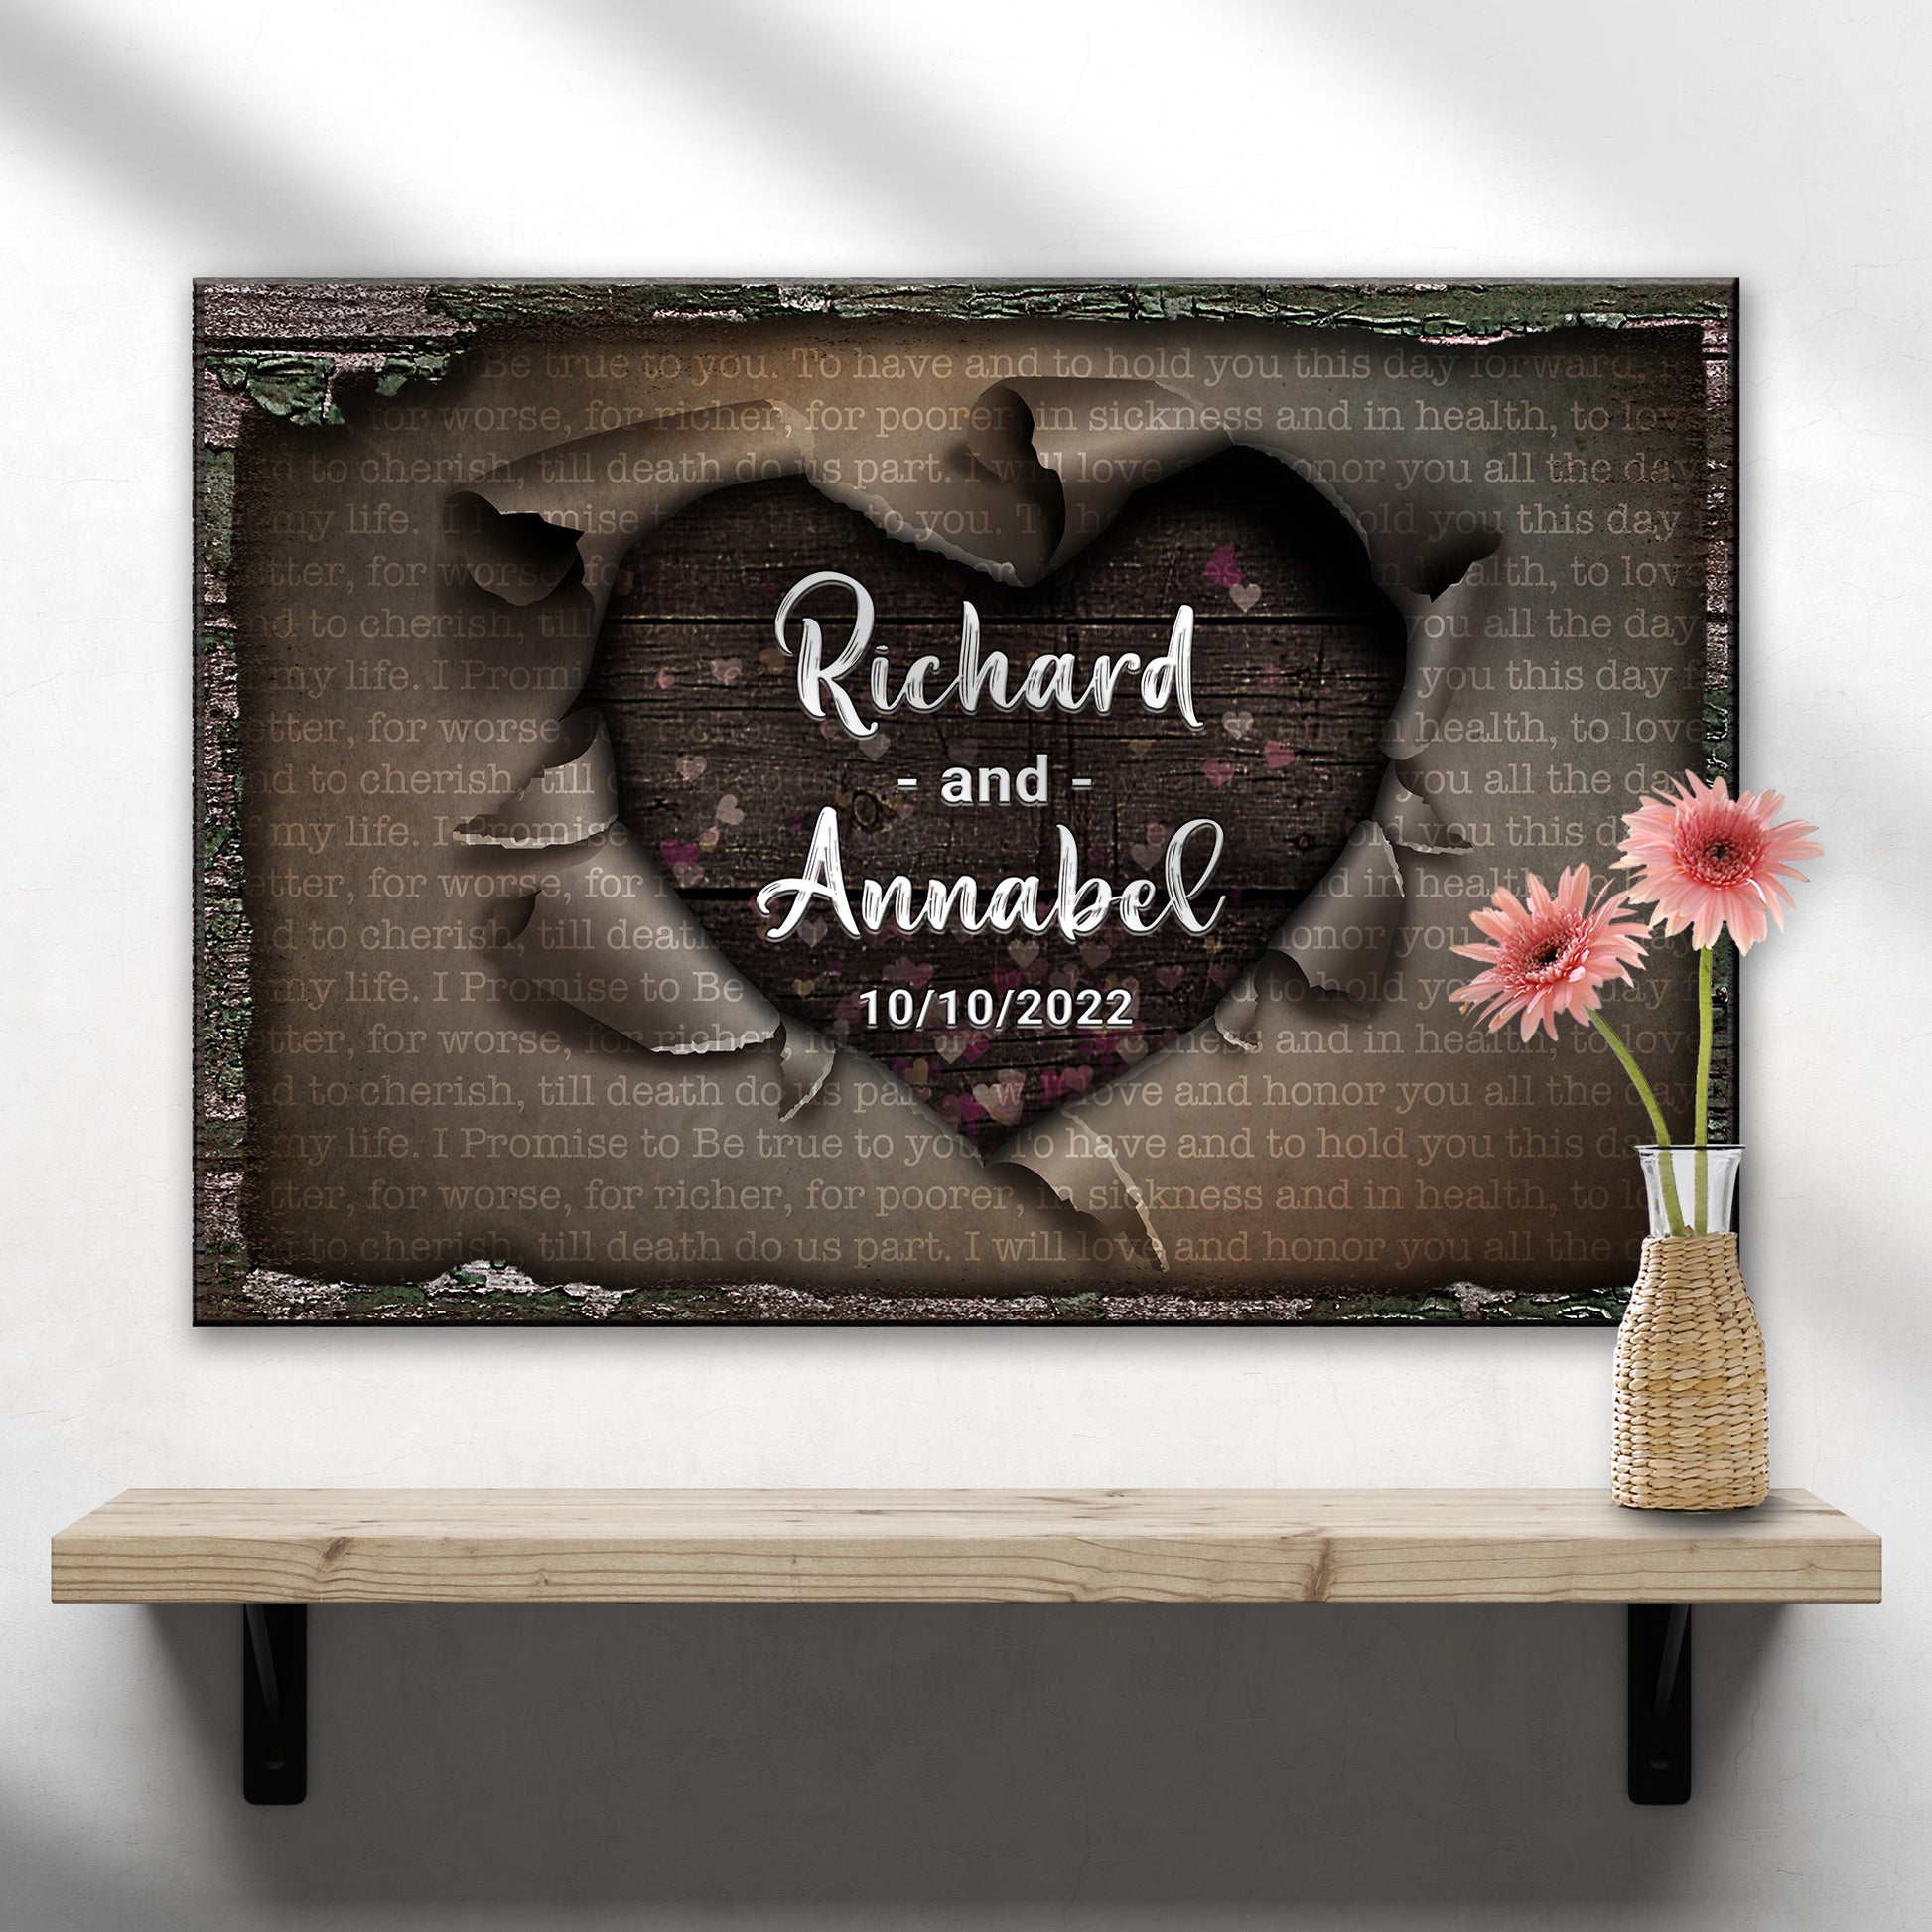 Unwrapped Heart Wedding Vows Sign  - Image by Tailored Canvases